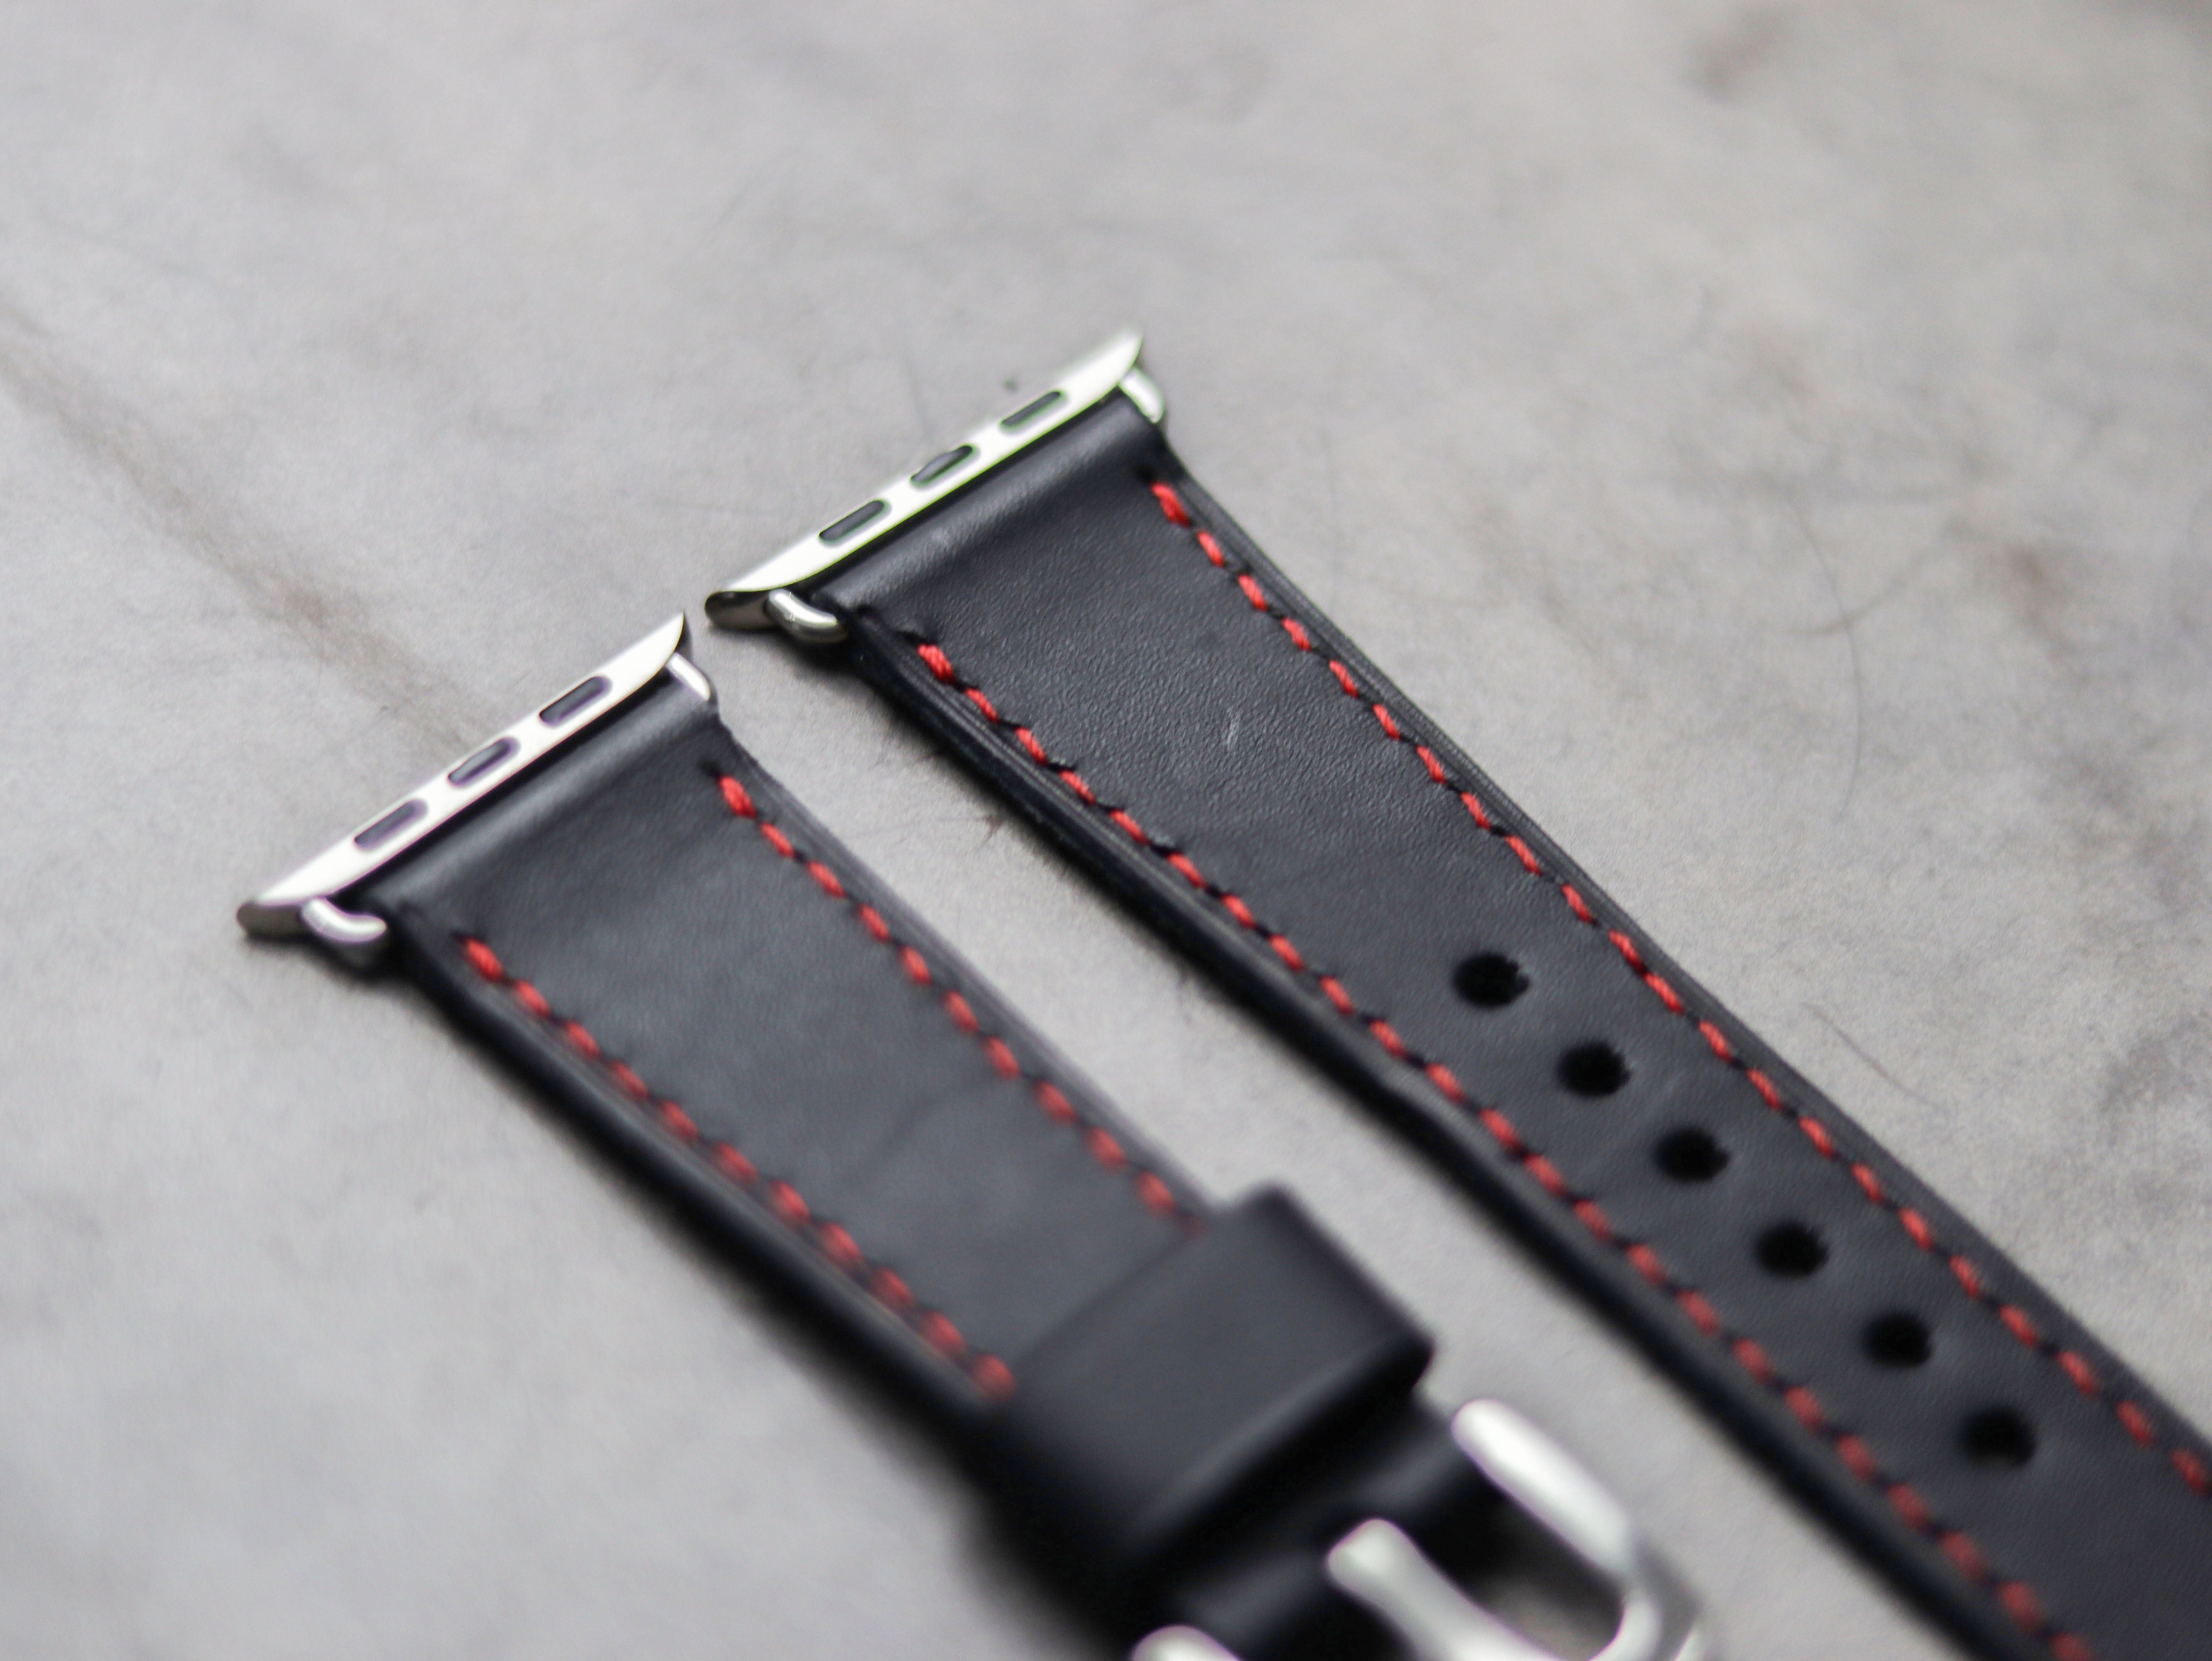 PHANTOM BLACK LEATHER - APPLE WATCH STRAPS HAND-CRAFTED